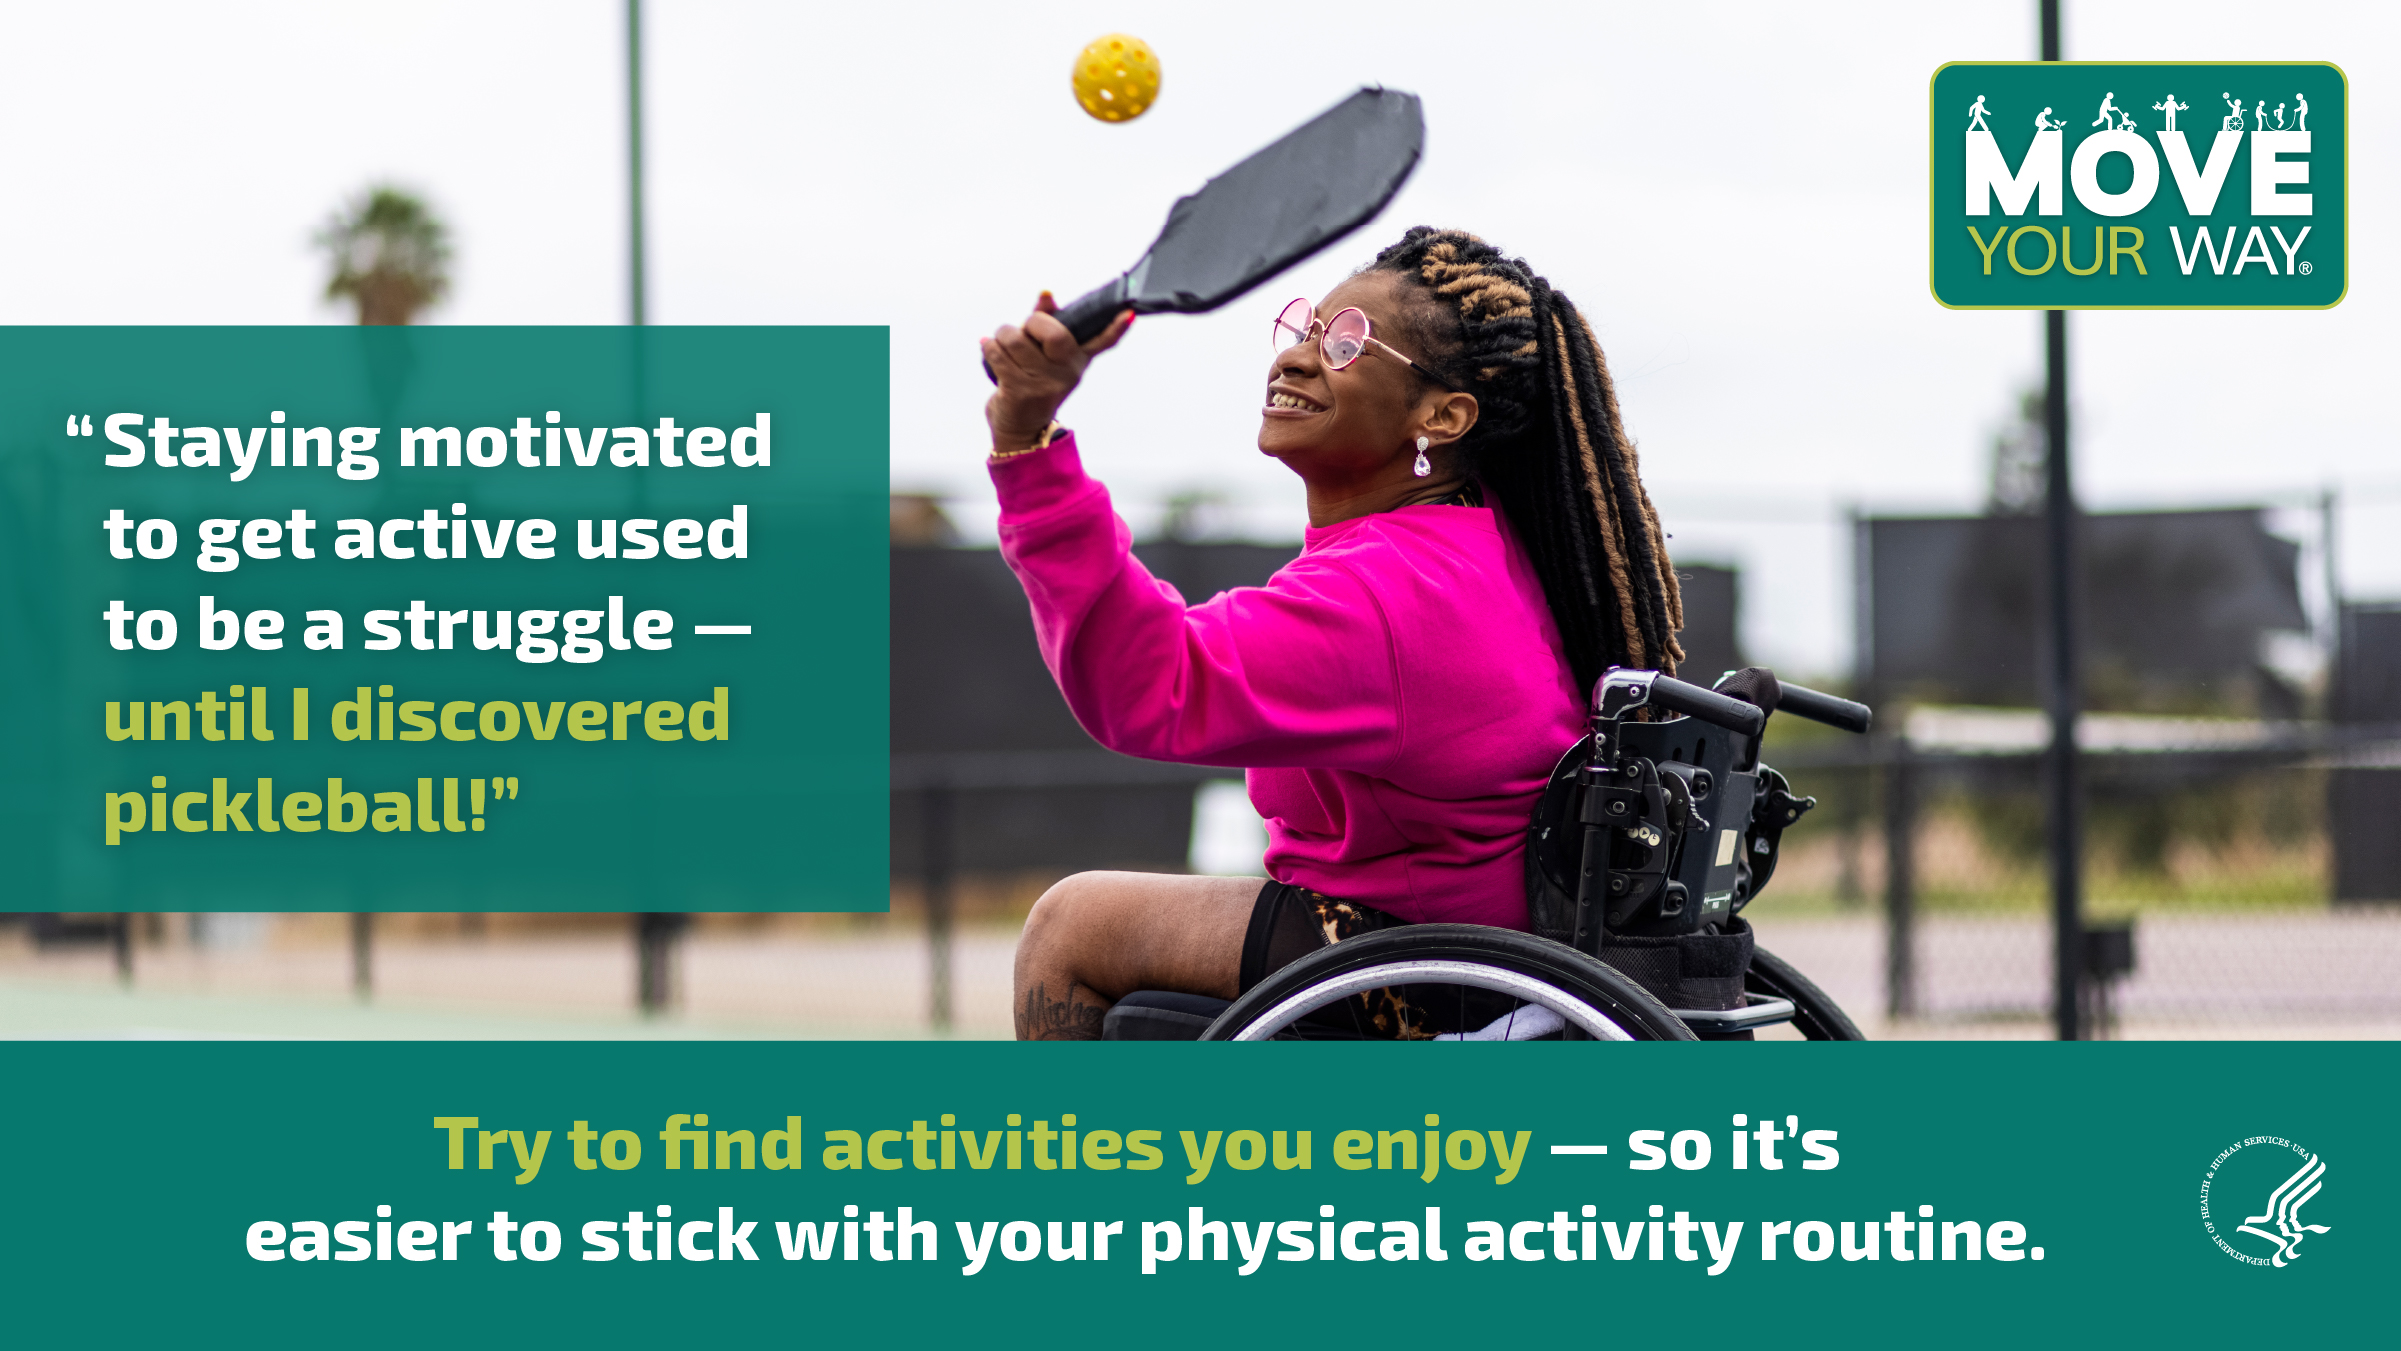 A young Black woman in a wheelchair is playing pickleball on an outdoor court. She’s smiling and enjoying herself. The image also shows the Move Your Way logo and the following messages: "Staying motivated to get active used to be a struggle — until I disovered pickleball." and "Try to find activities you enjoy — so it's easier to stick with your physical activity routine."